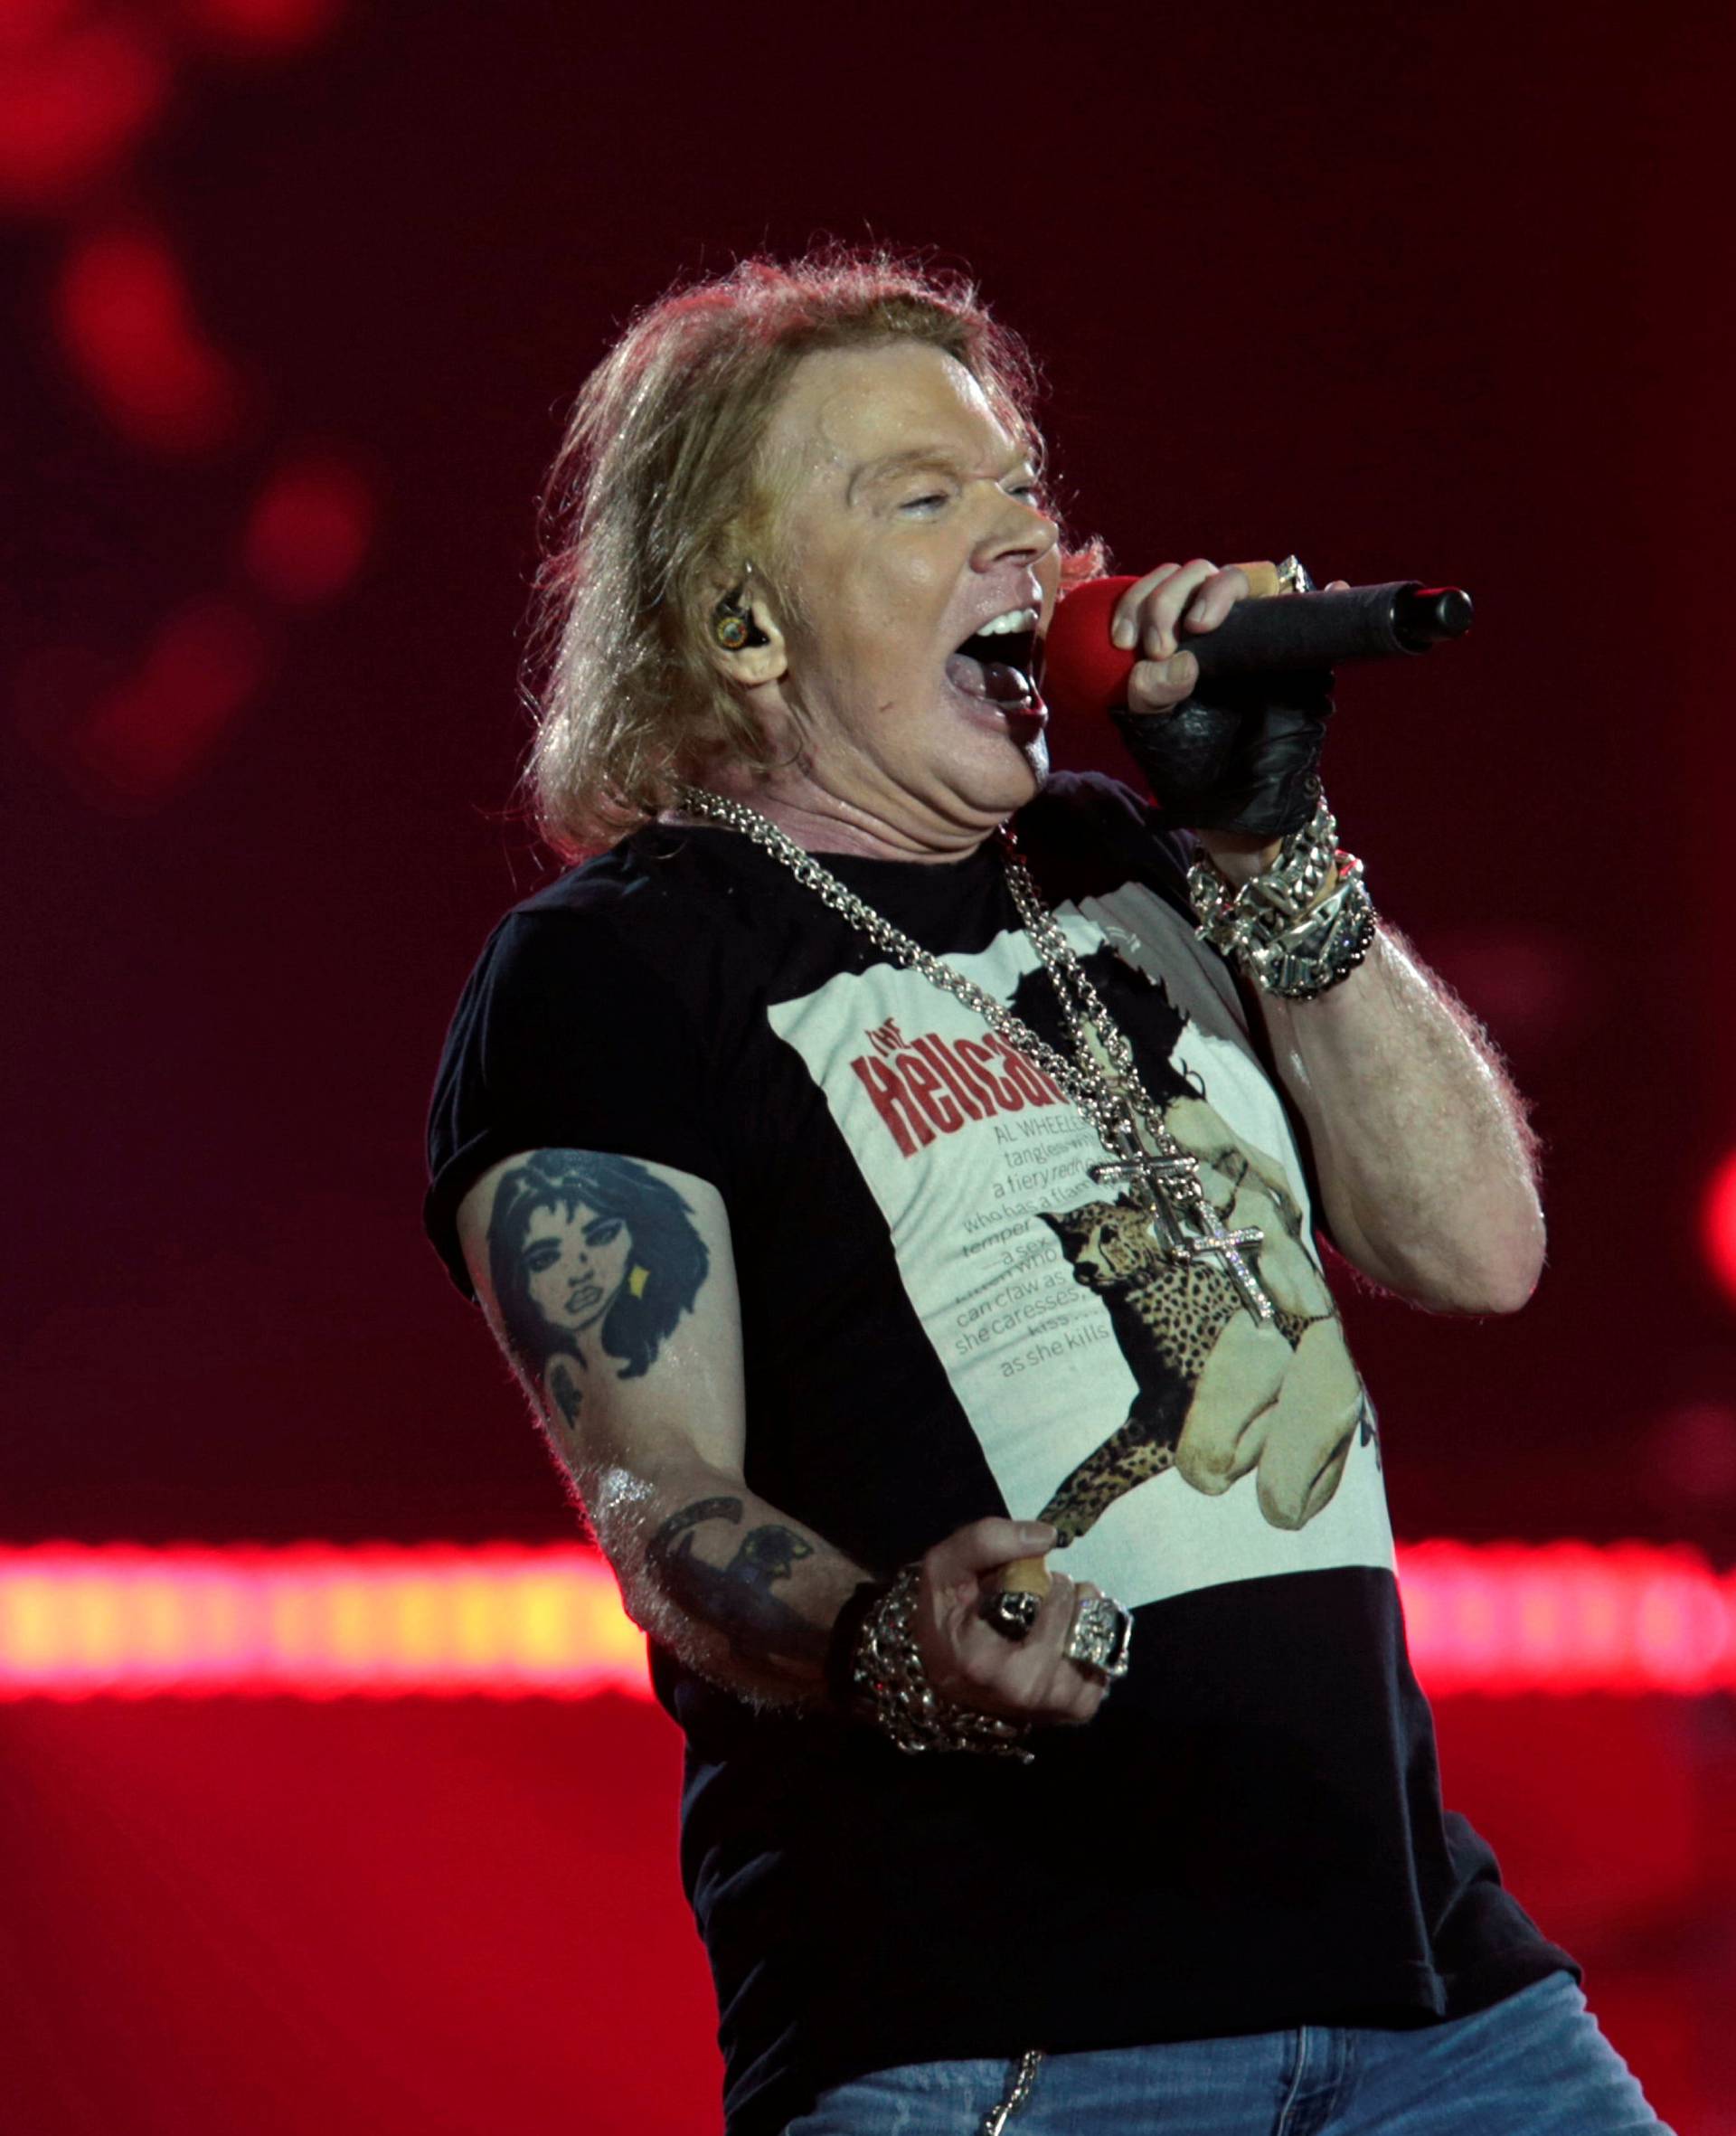 Axl Rose, lead singer of U.S. rock band Guns N' Roses, performs during their "Not in This Lifetime... Tour" at the du Arena in Abu Dhabi